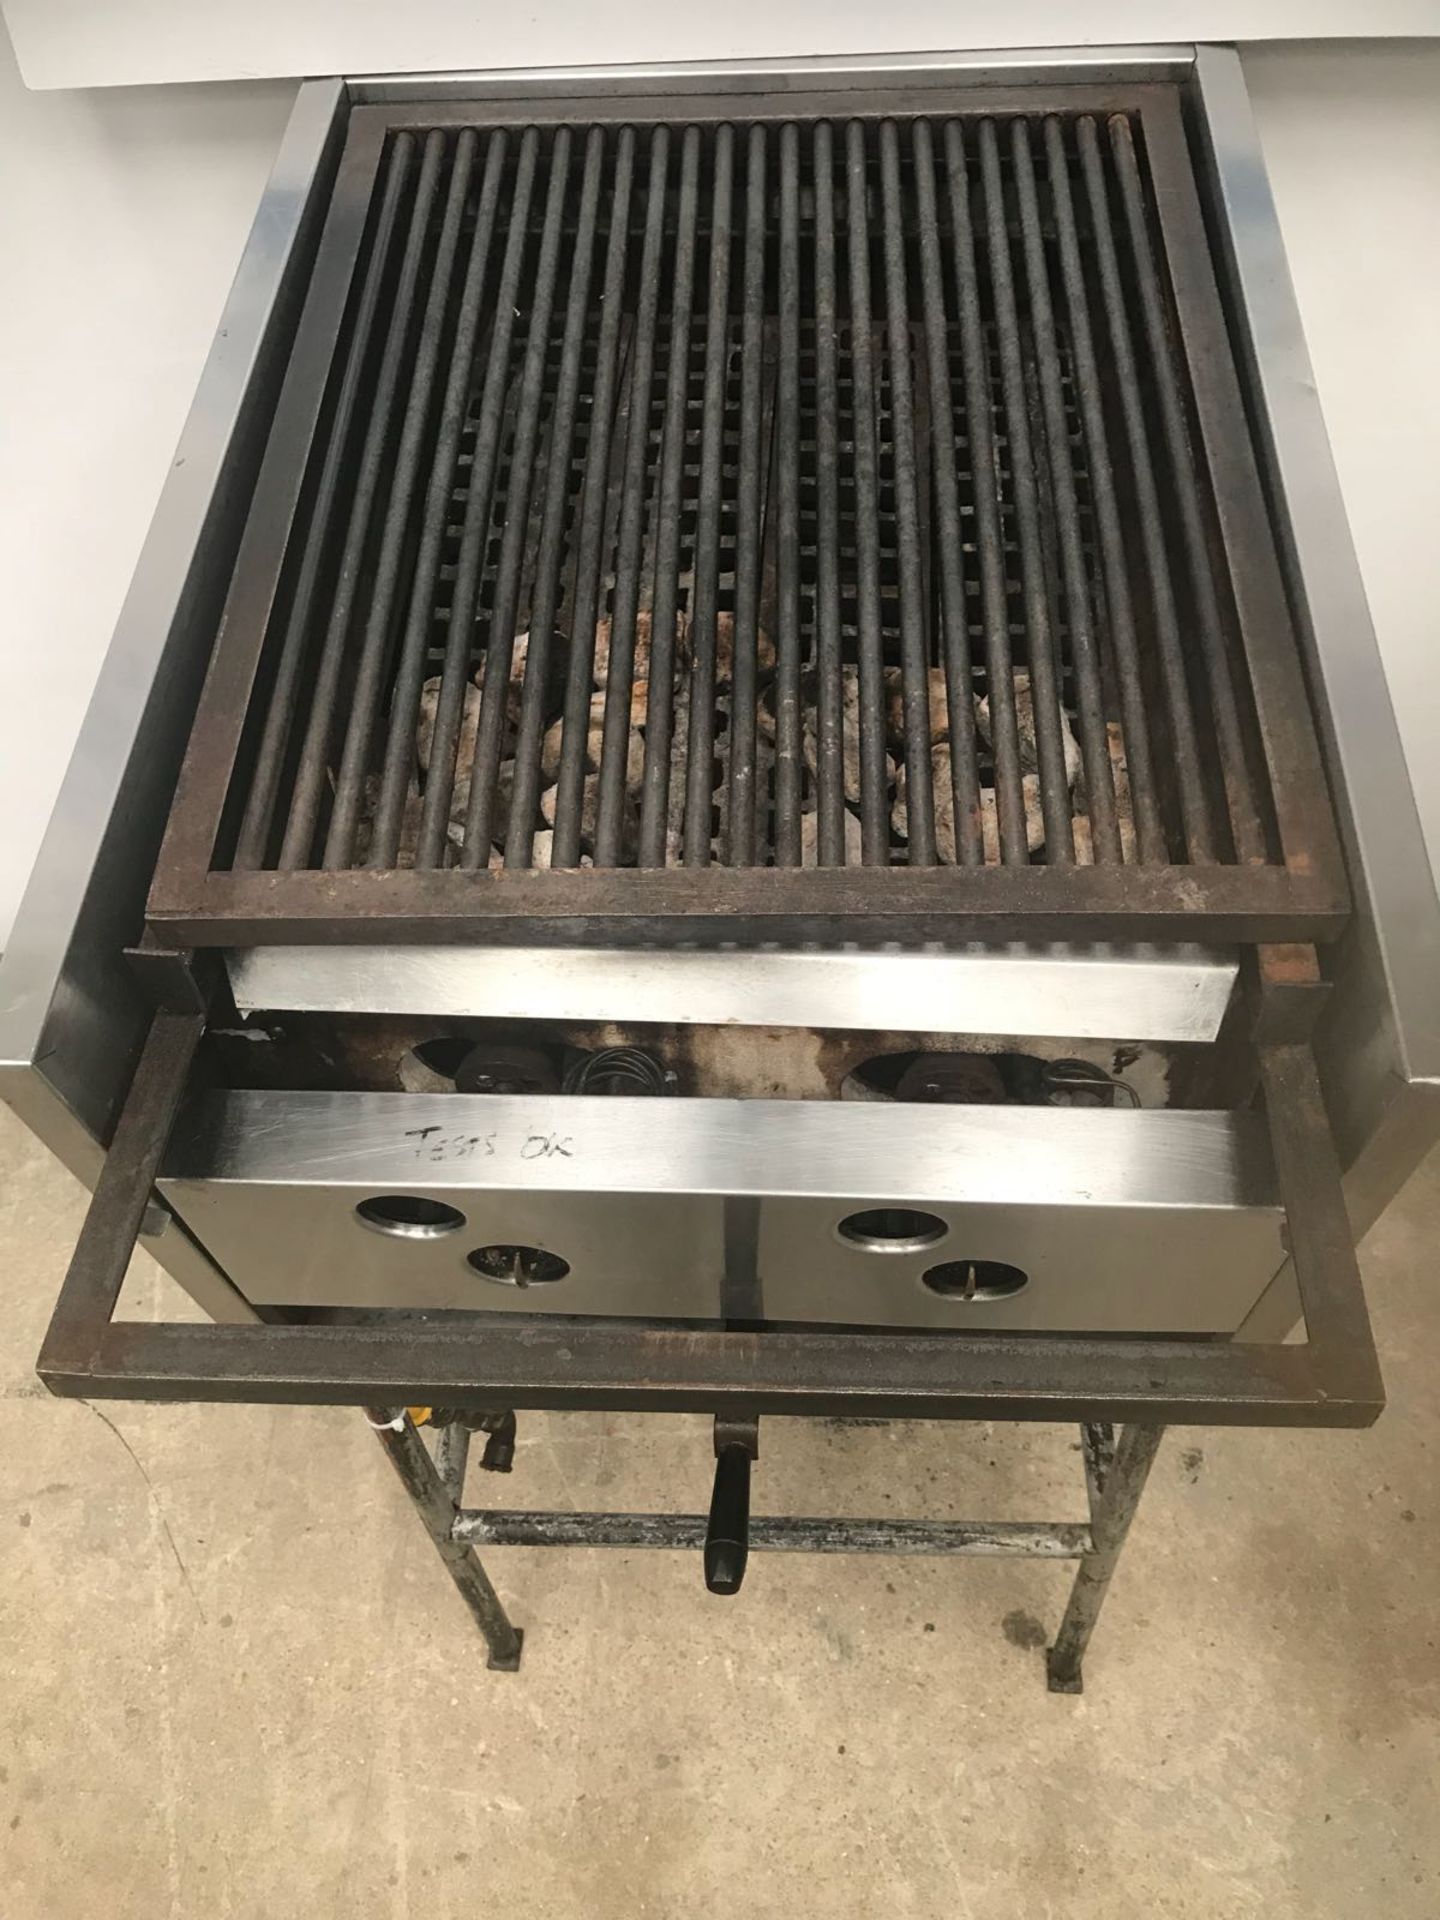 W.M Still and Sons GC24 Gas Griddle Stainless steel coated gas grill 600 x 850 x 110mm - Image 2 of 3